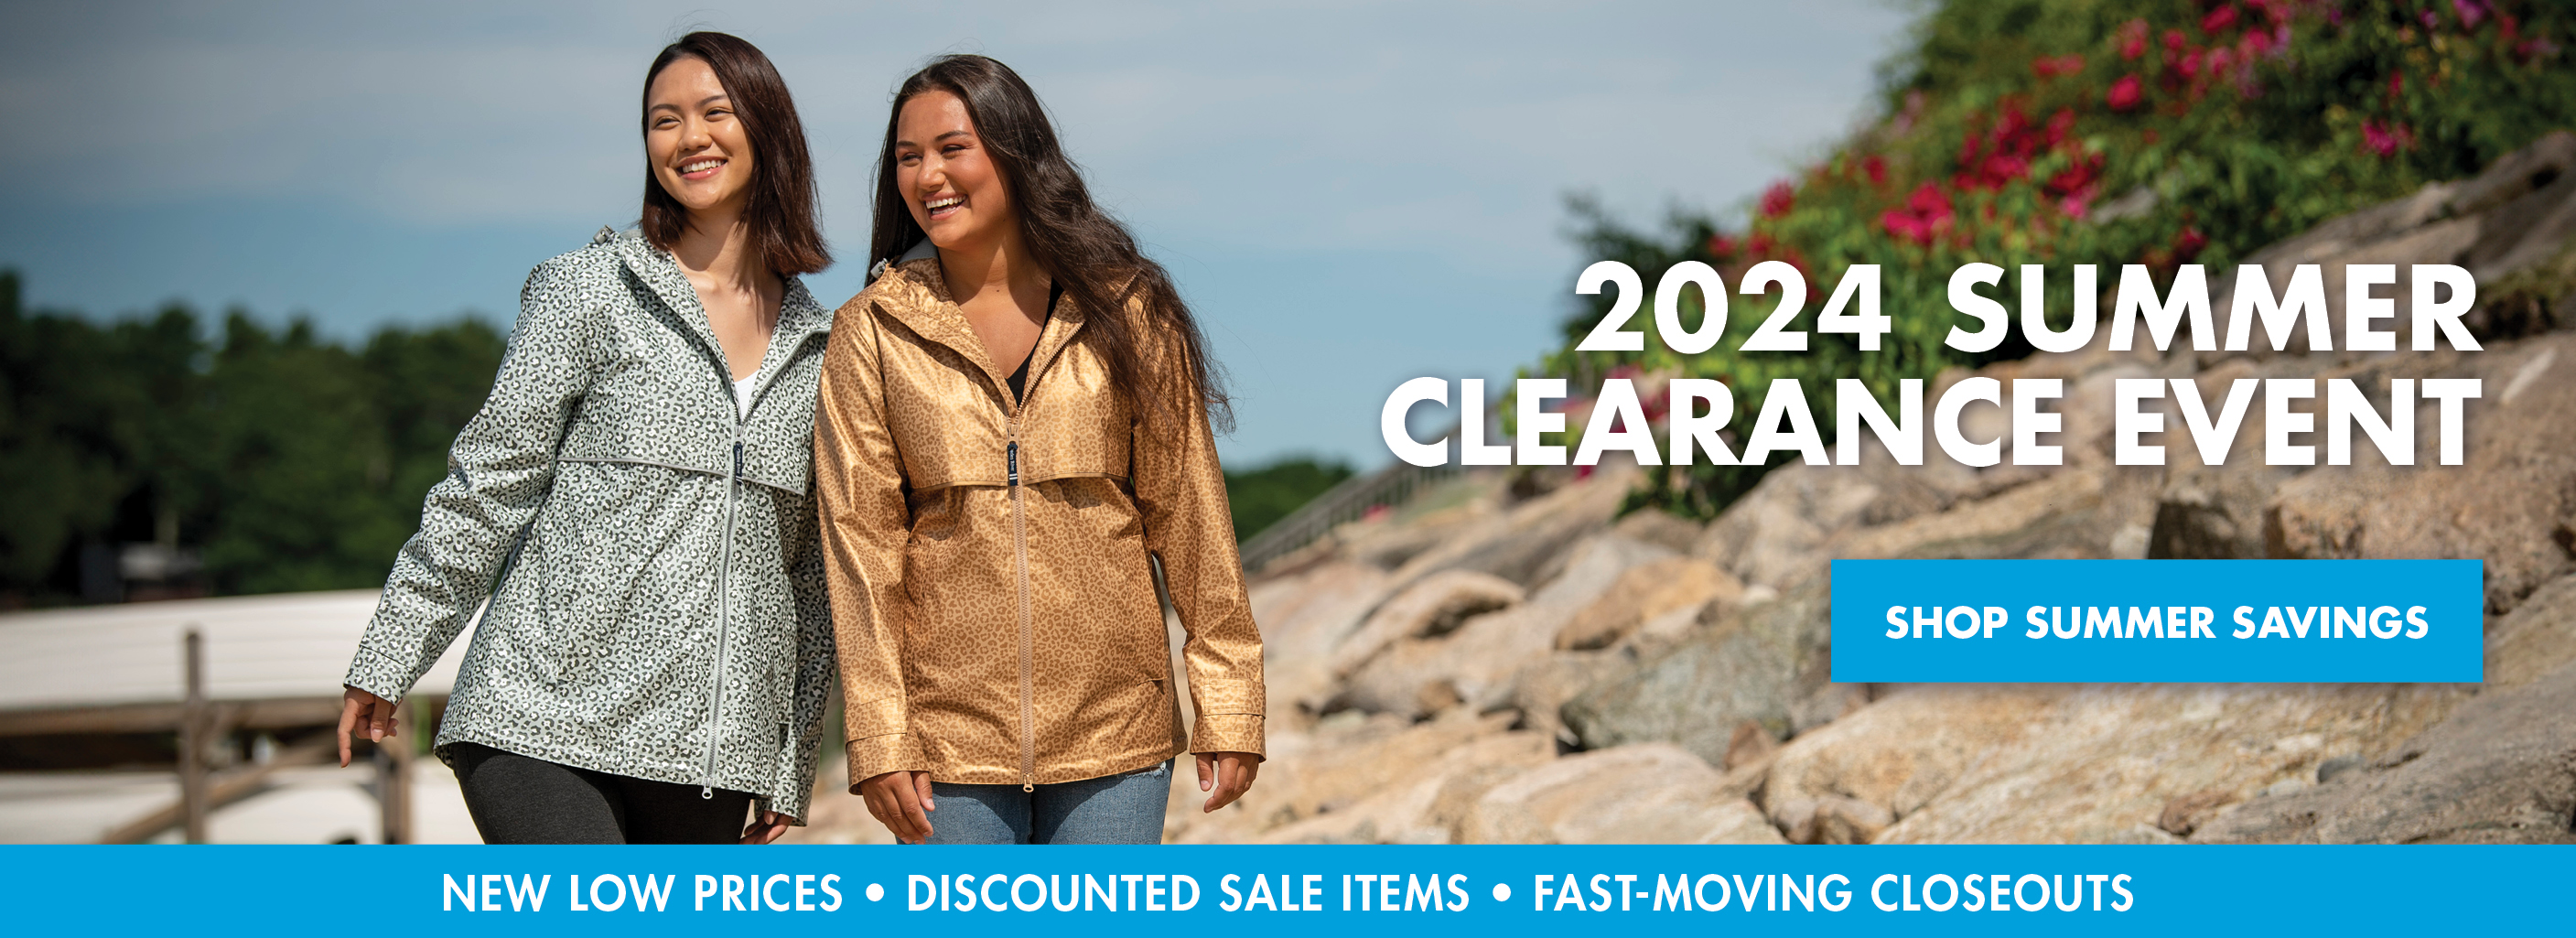 2024 Summer Clearance Event - Shop Summer Savings - New Low Prices - Discounted Sale Items - Fast-moving Closeouts